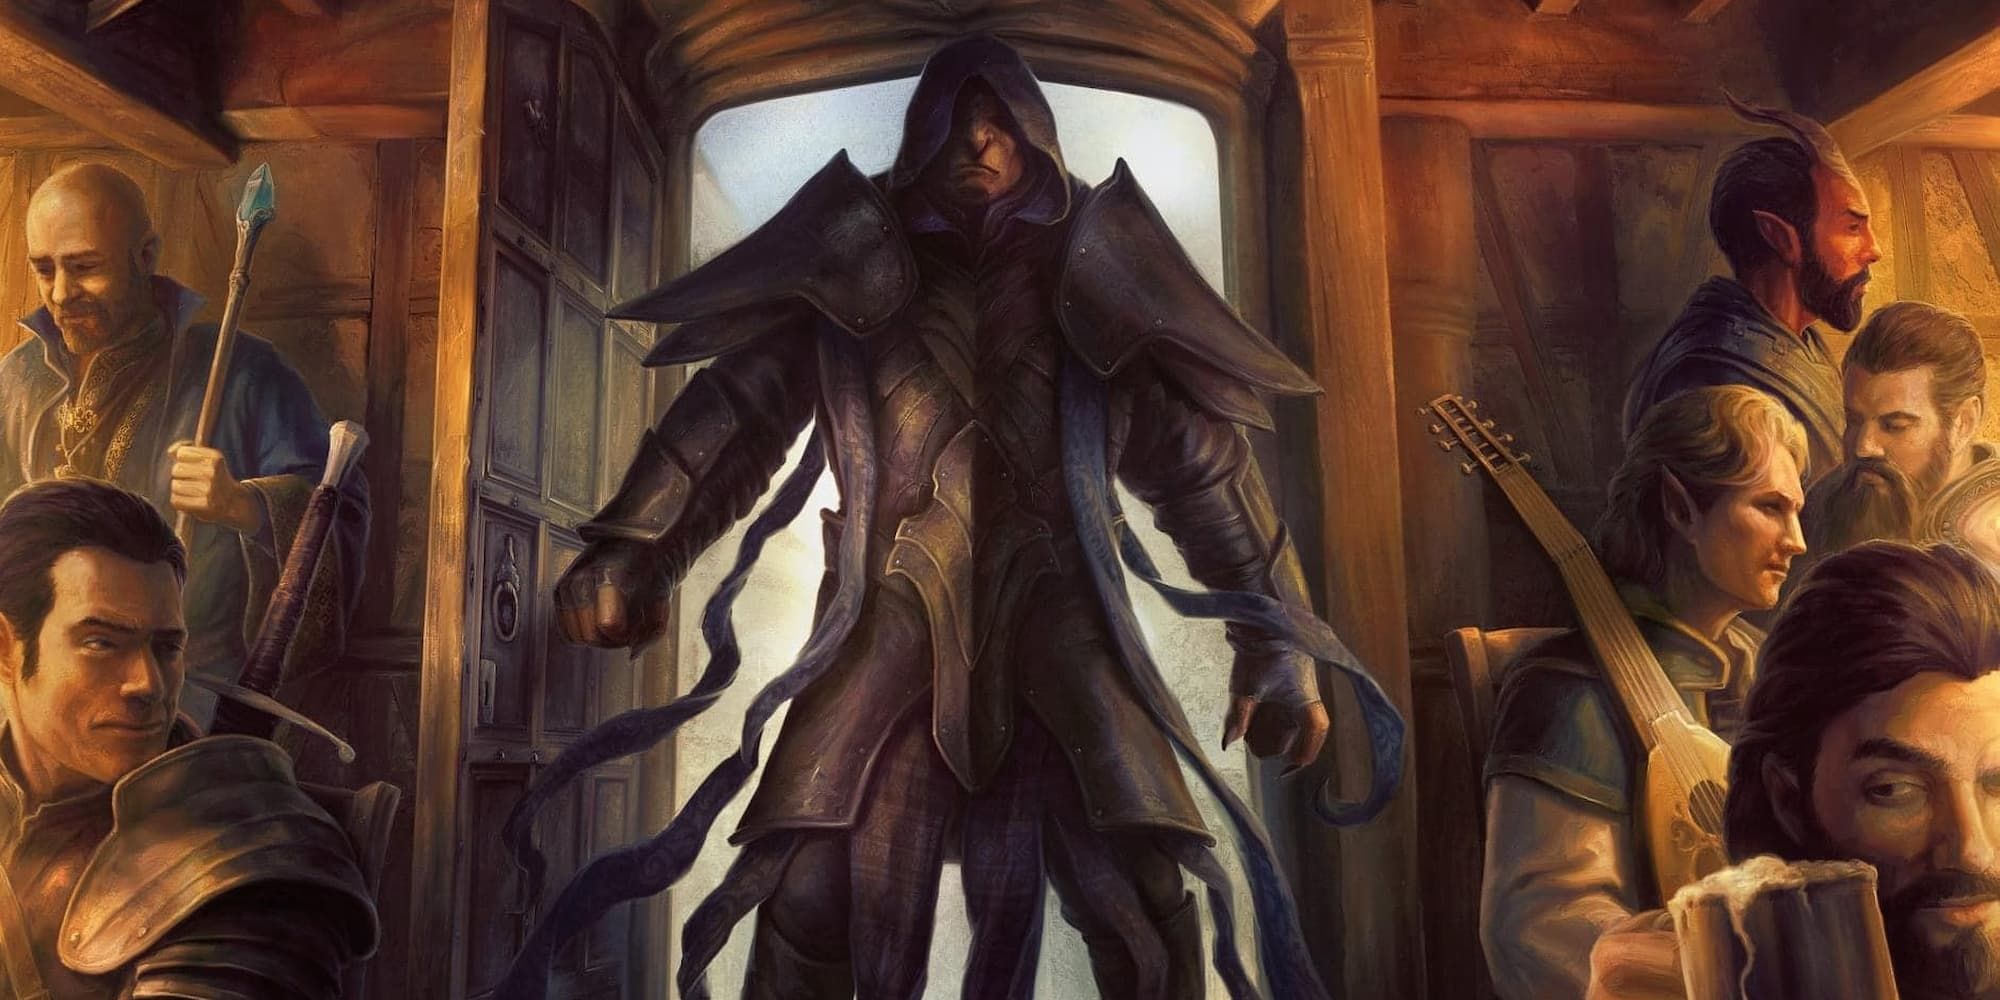 A hooded figure standing in the open doorway of a tavern, whilst patrons glance at them